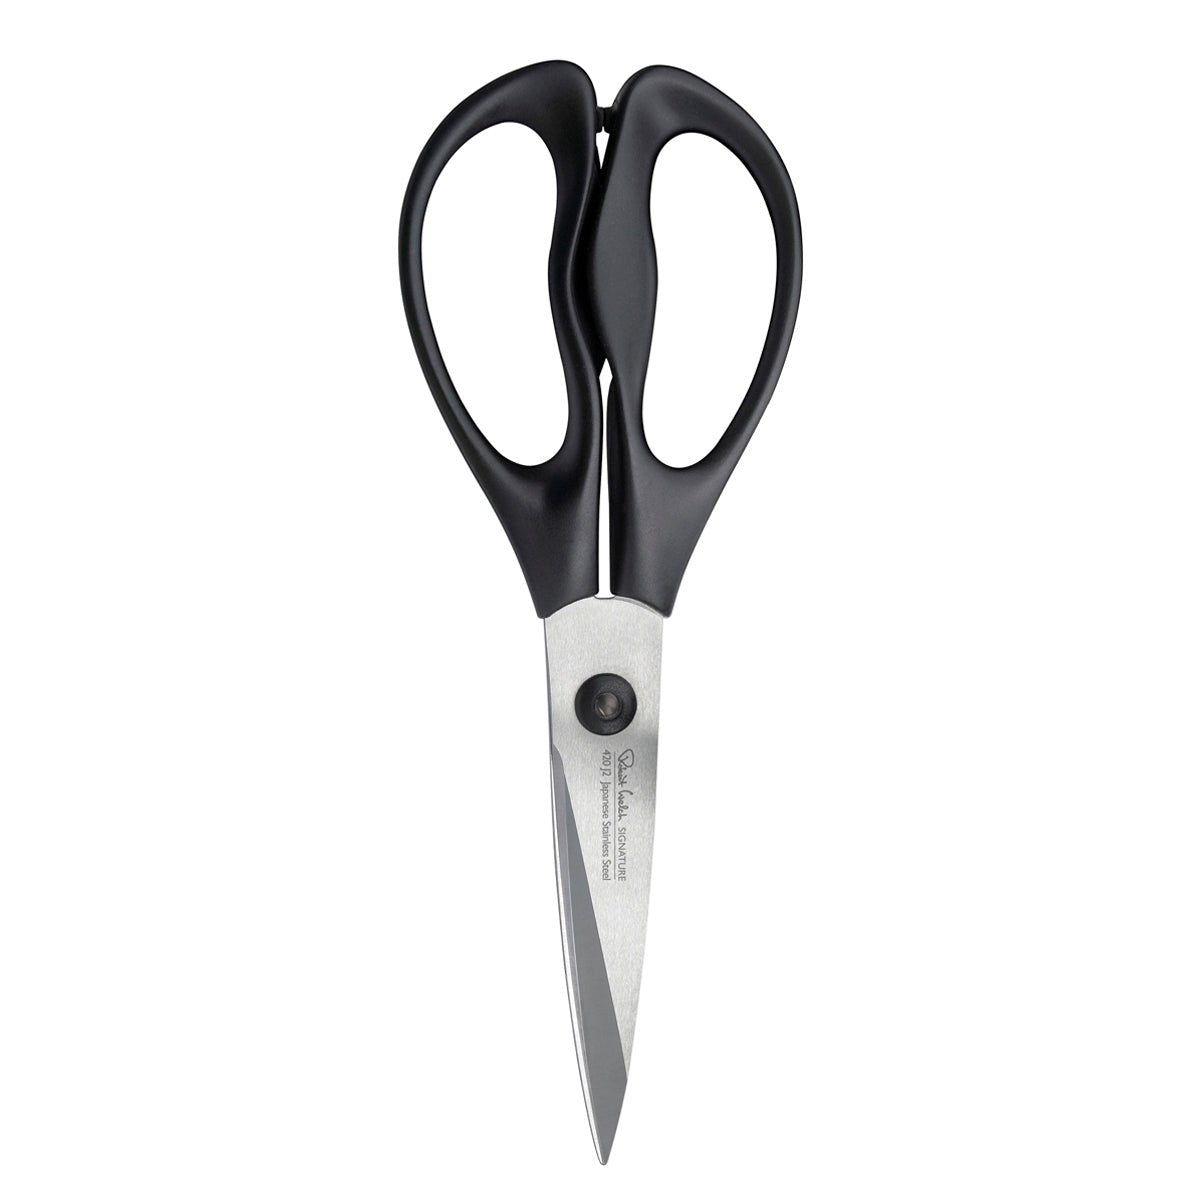 Robert Welch Signature Household Scissors - SIGSA2201V - The Cotswold Knife Company